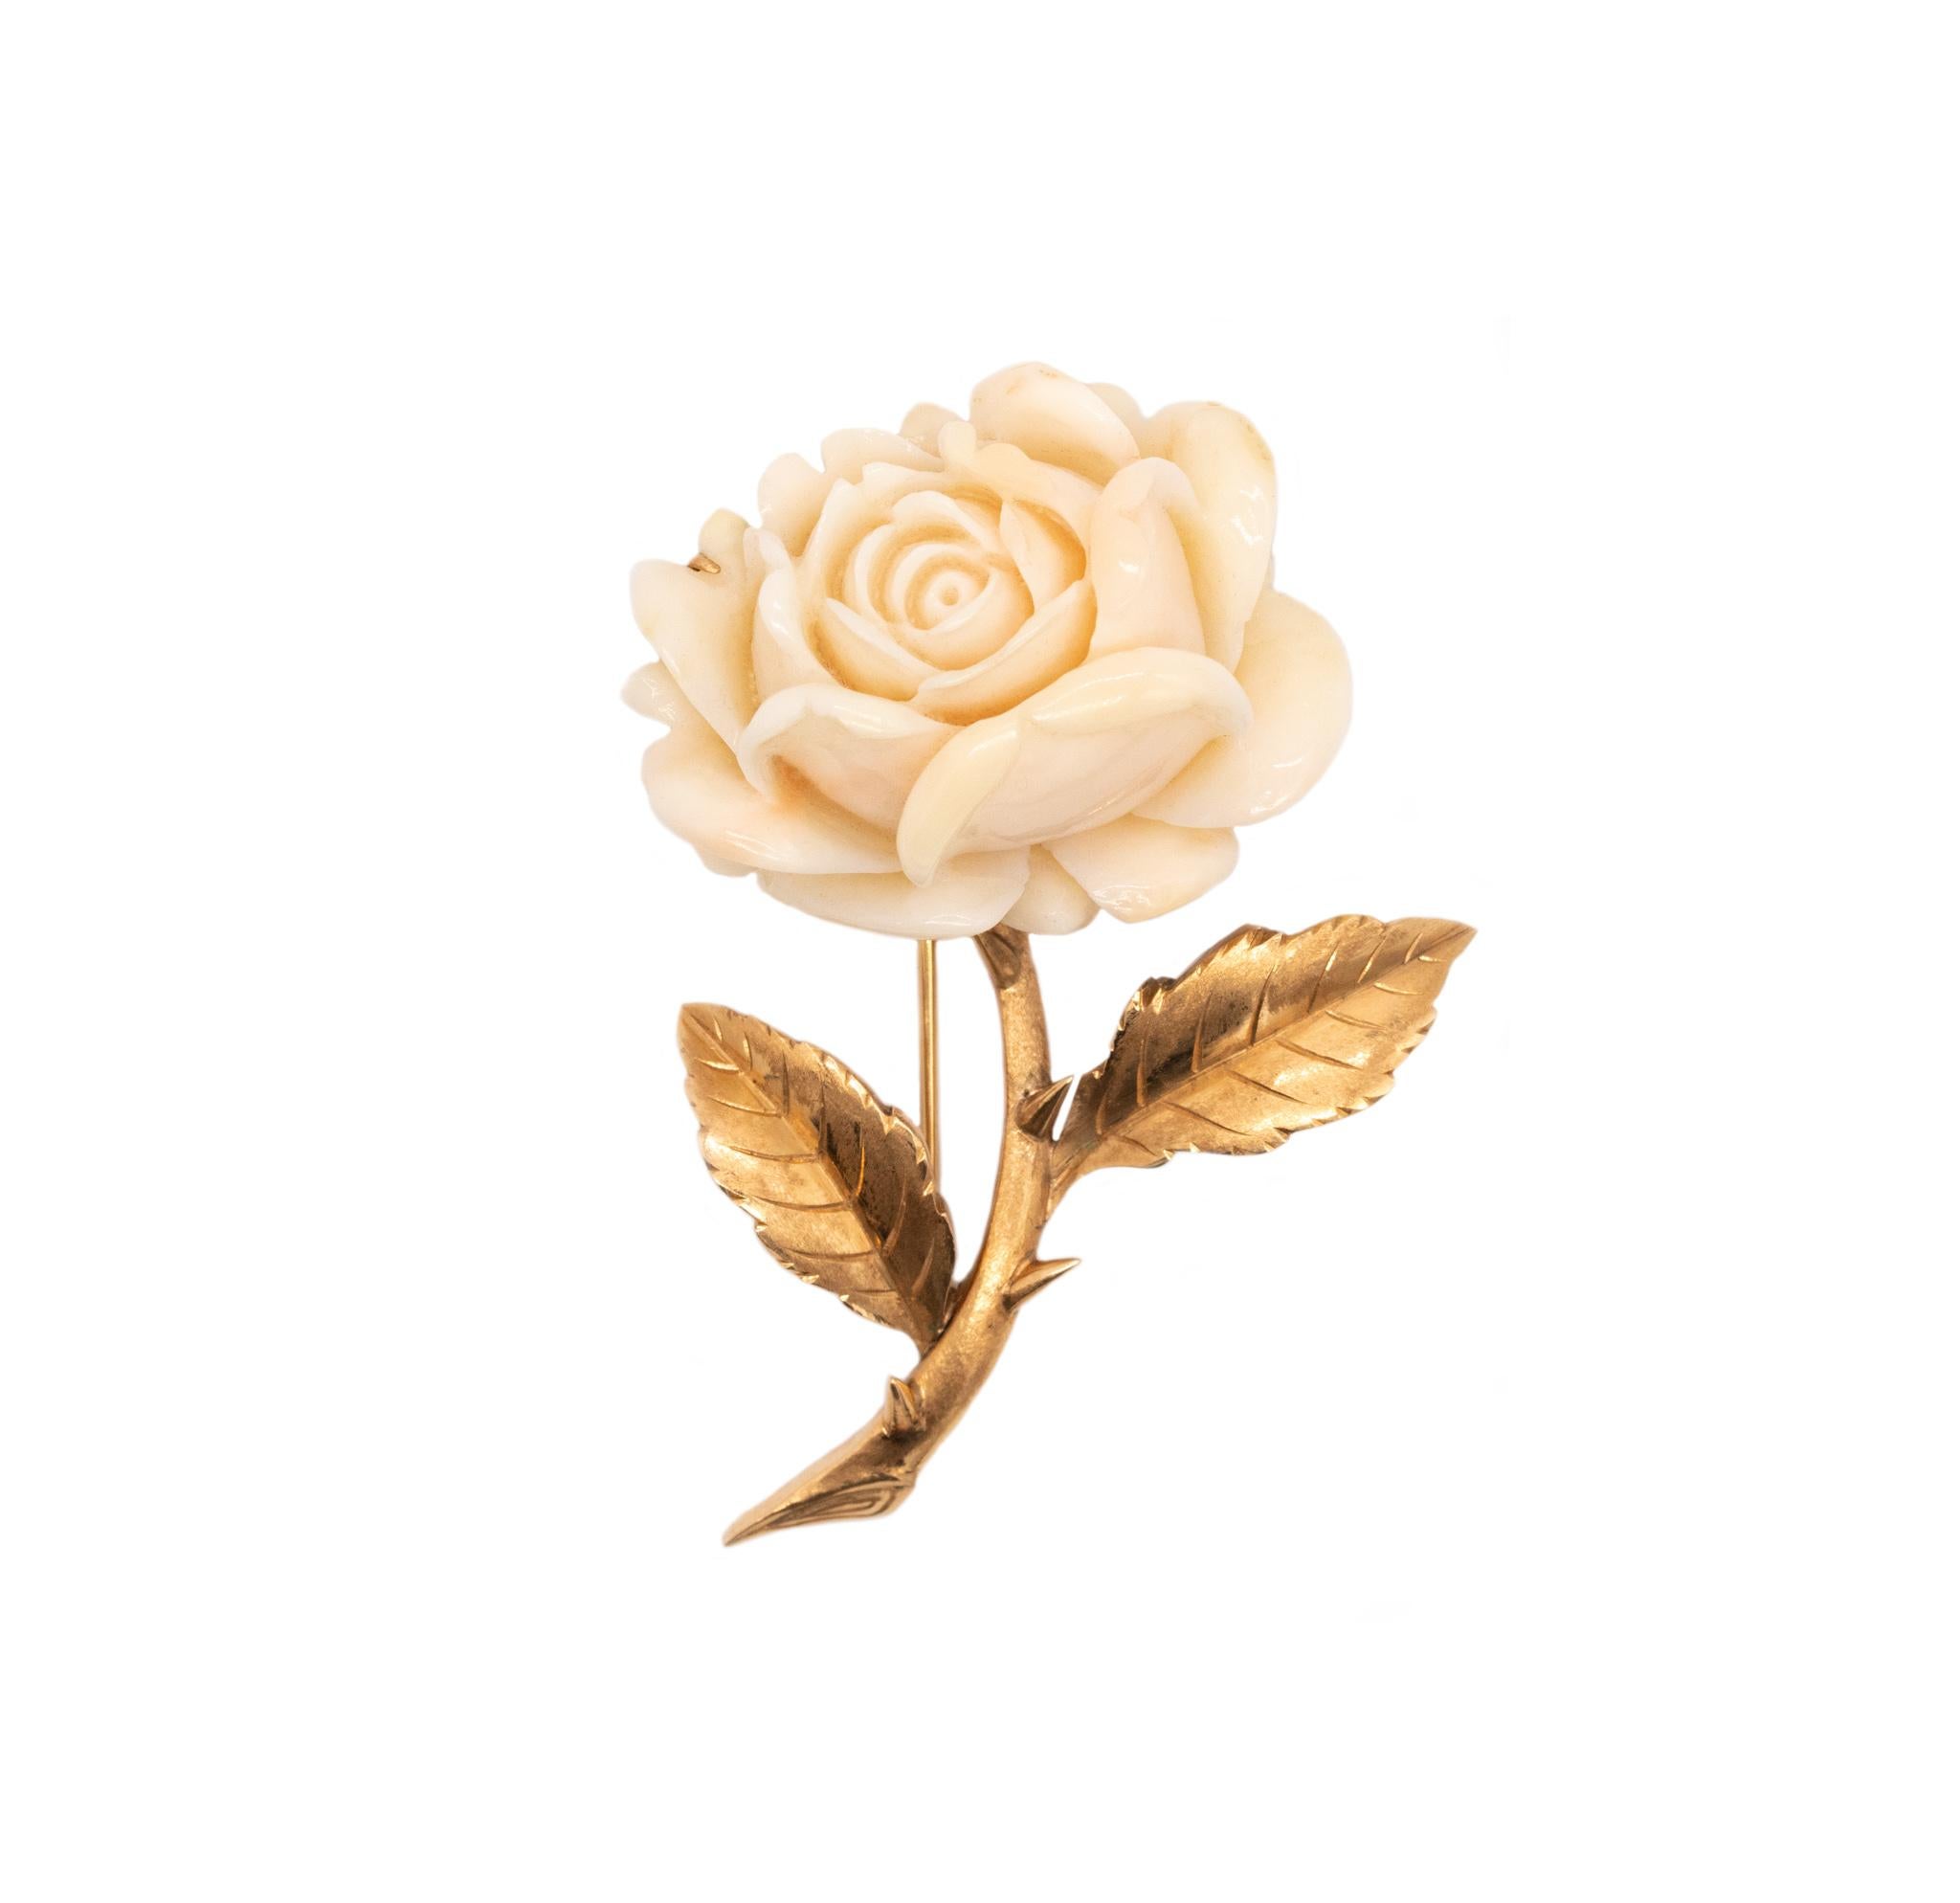 Vintage Italian 1950 Rose brooch.

Beautiful piece, crafted with very realistic organic details in solid 14 kt of textured yellow gold. It is suited at the reverse, with a vertical hinged pin bar with a security trombone lock.

Embellished, with an